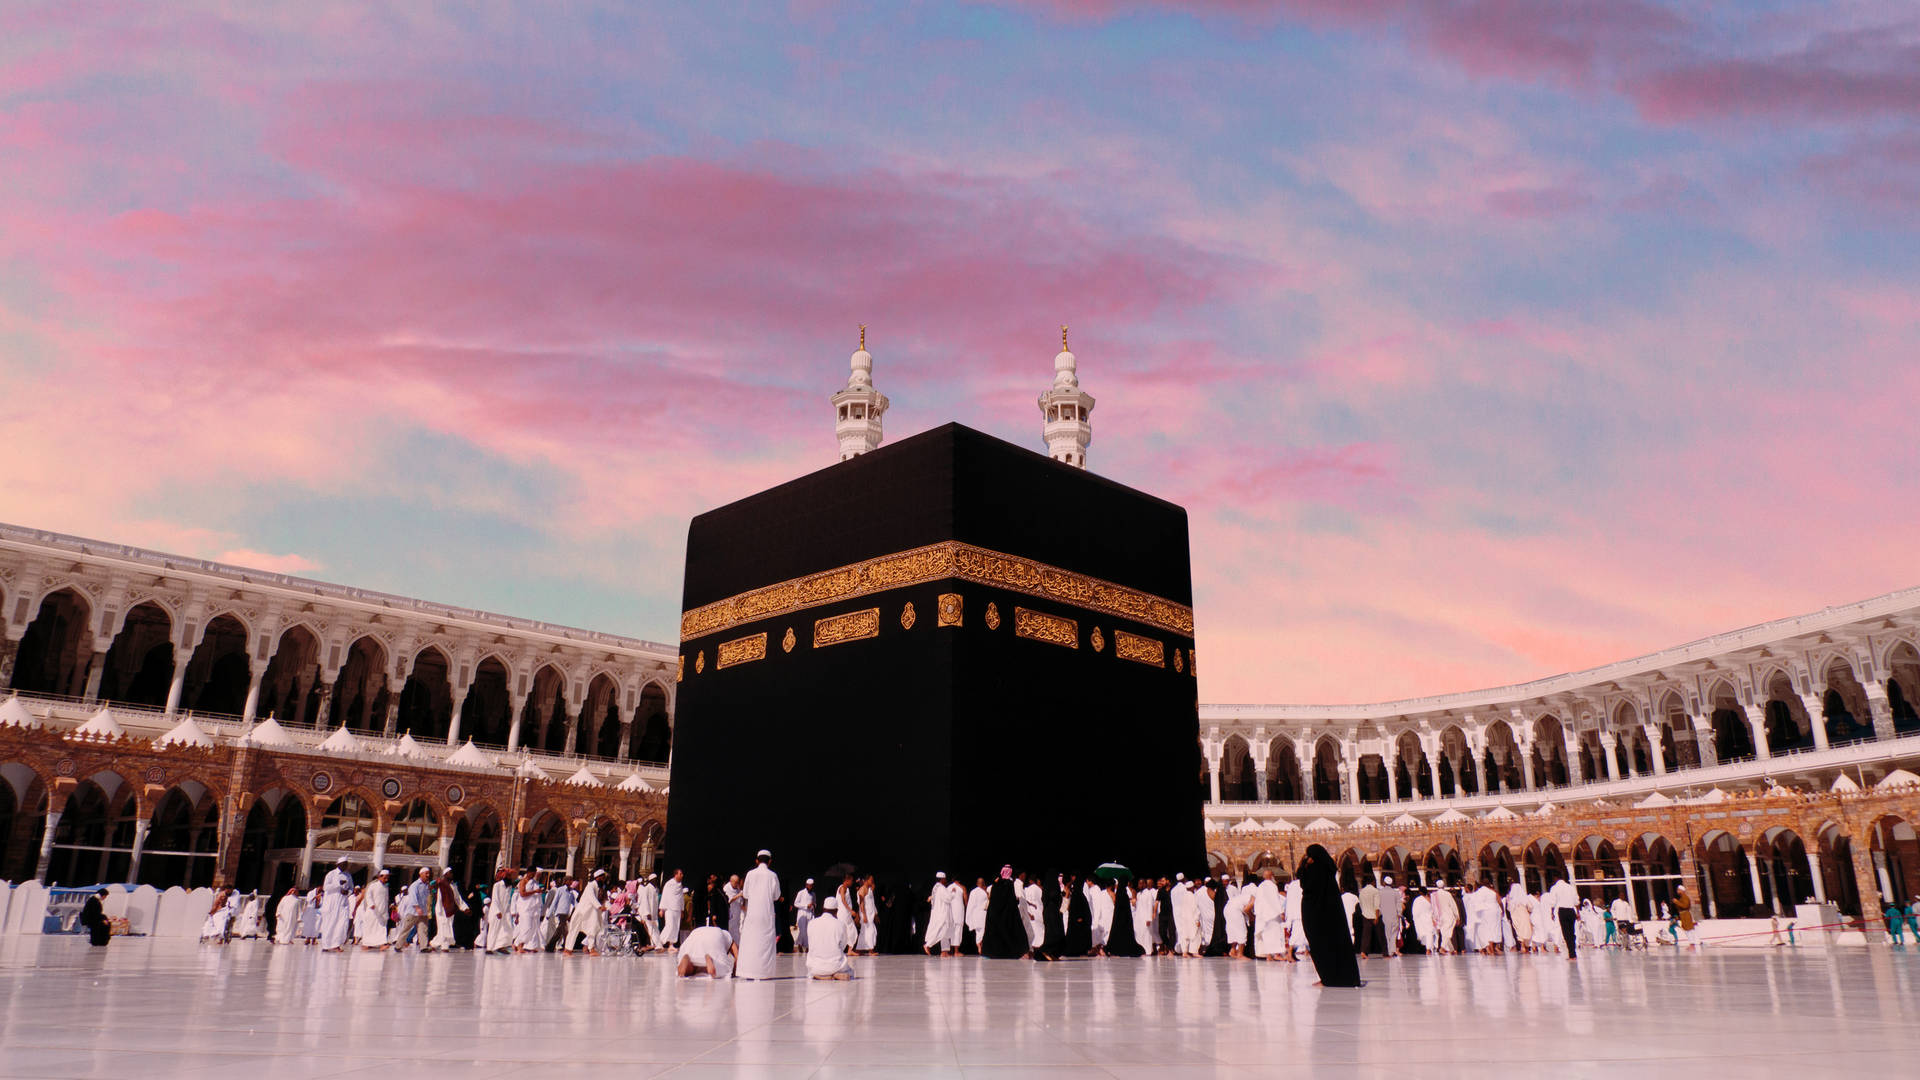 Kaaba Cloudy Pink Sky Background